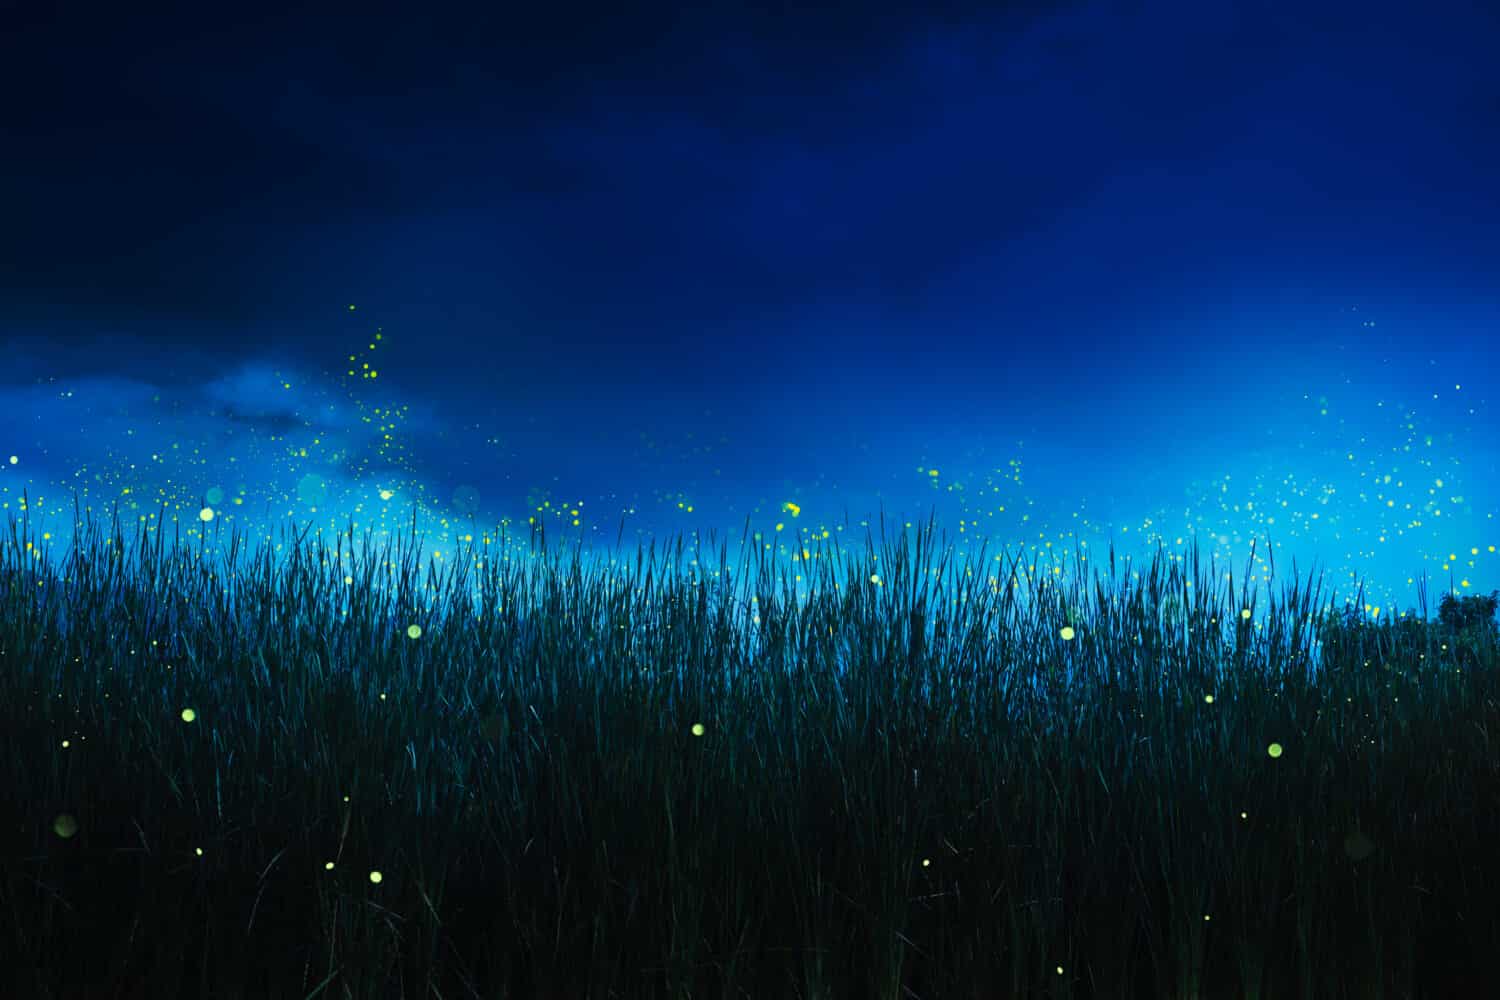 glowing fireflies on a grass filed at night